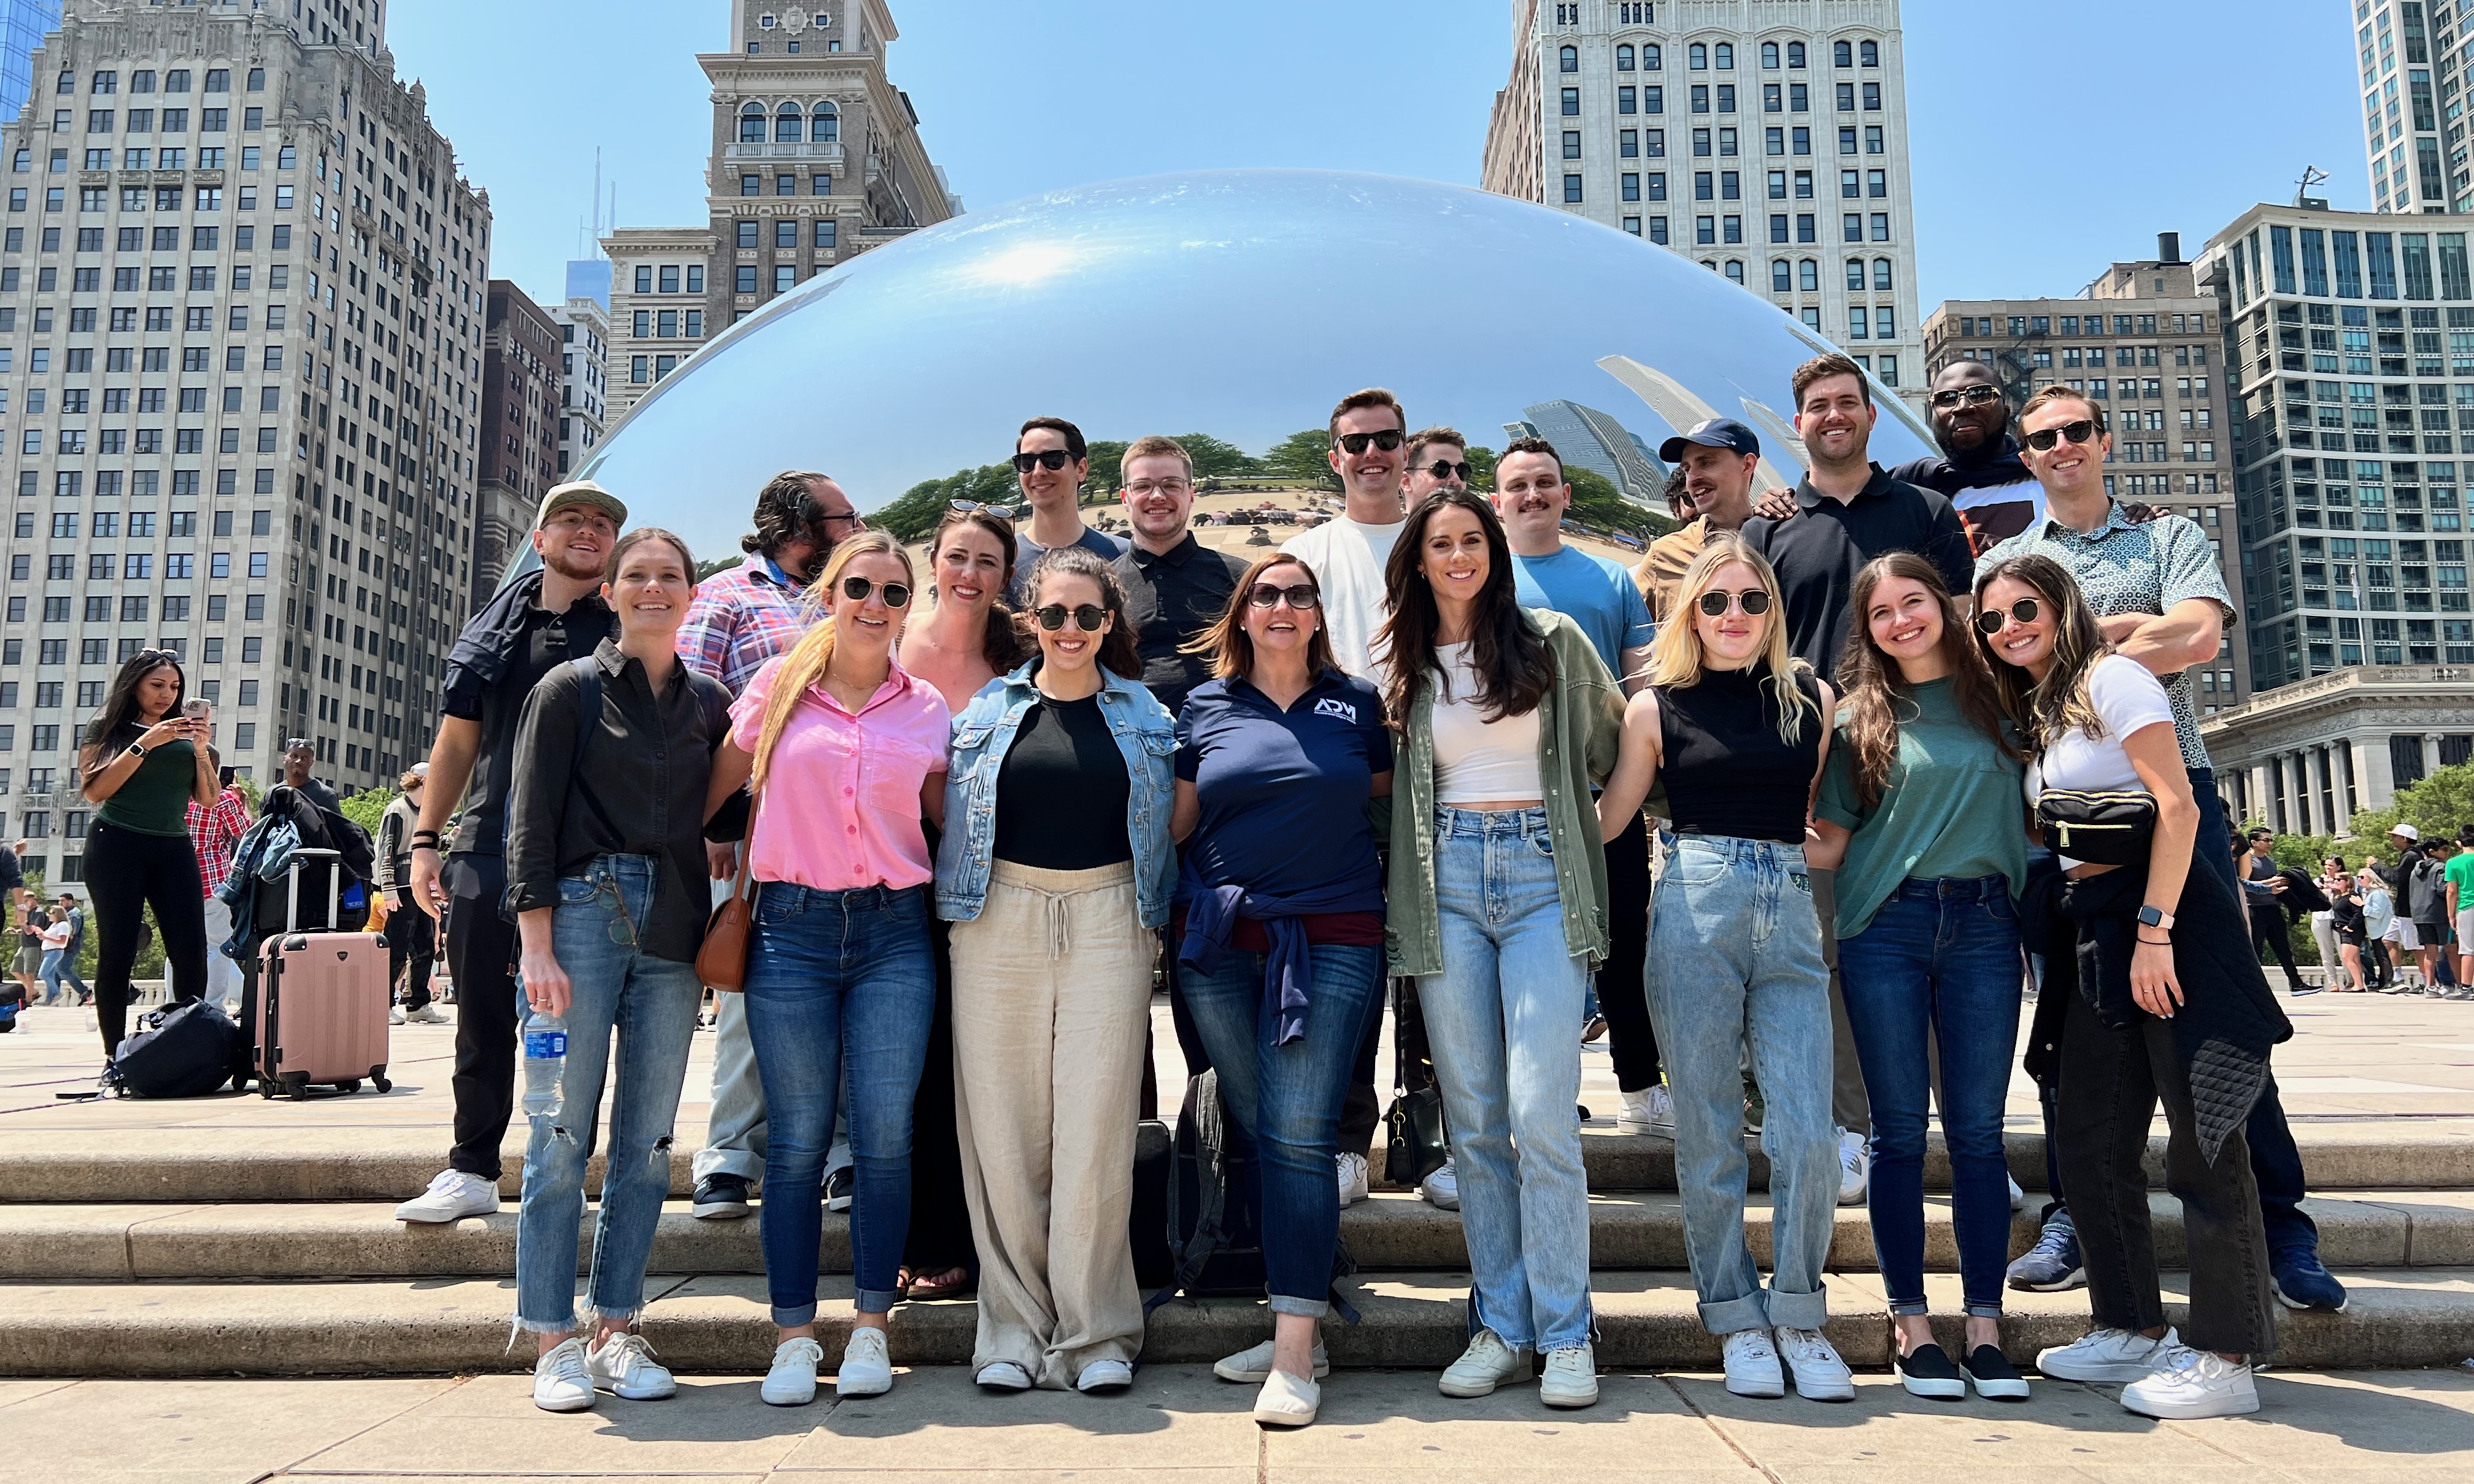 Group photo of ADM team members in front of Chicago’s Cloudgate sculpture, a.k.a. “The Bean.”